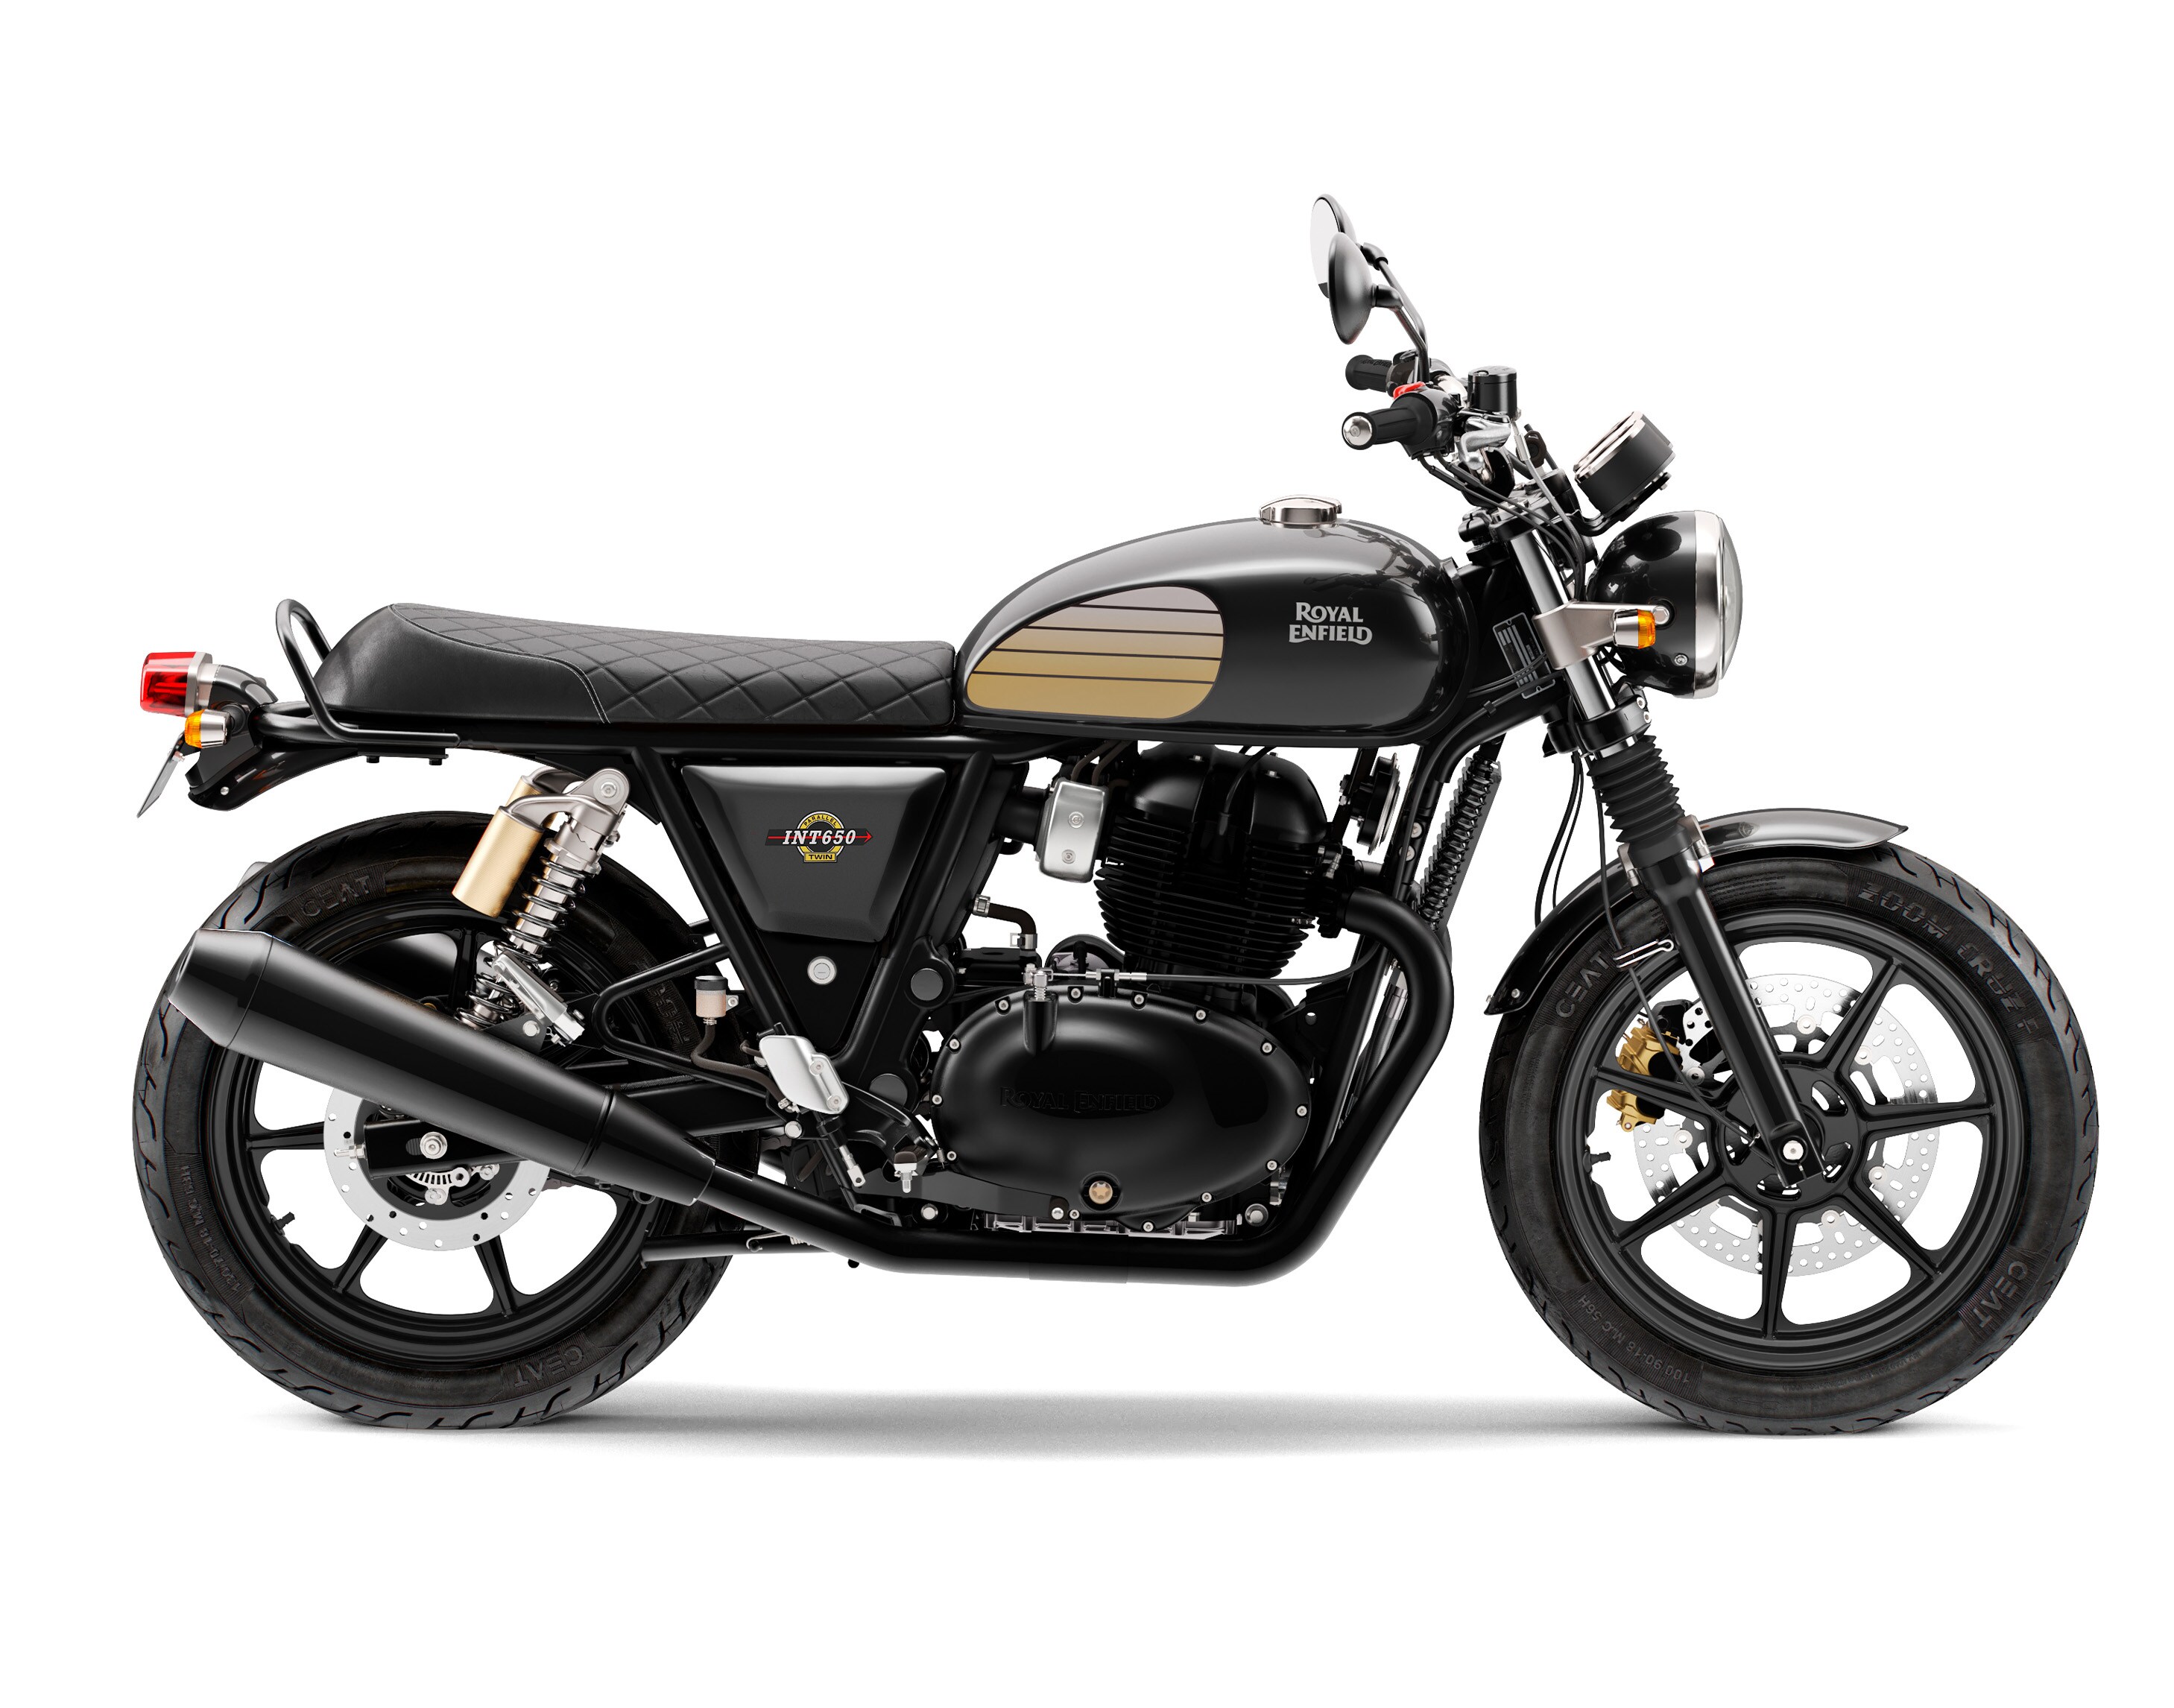 Royal Enfield Int 650 Motorcyle